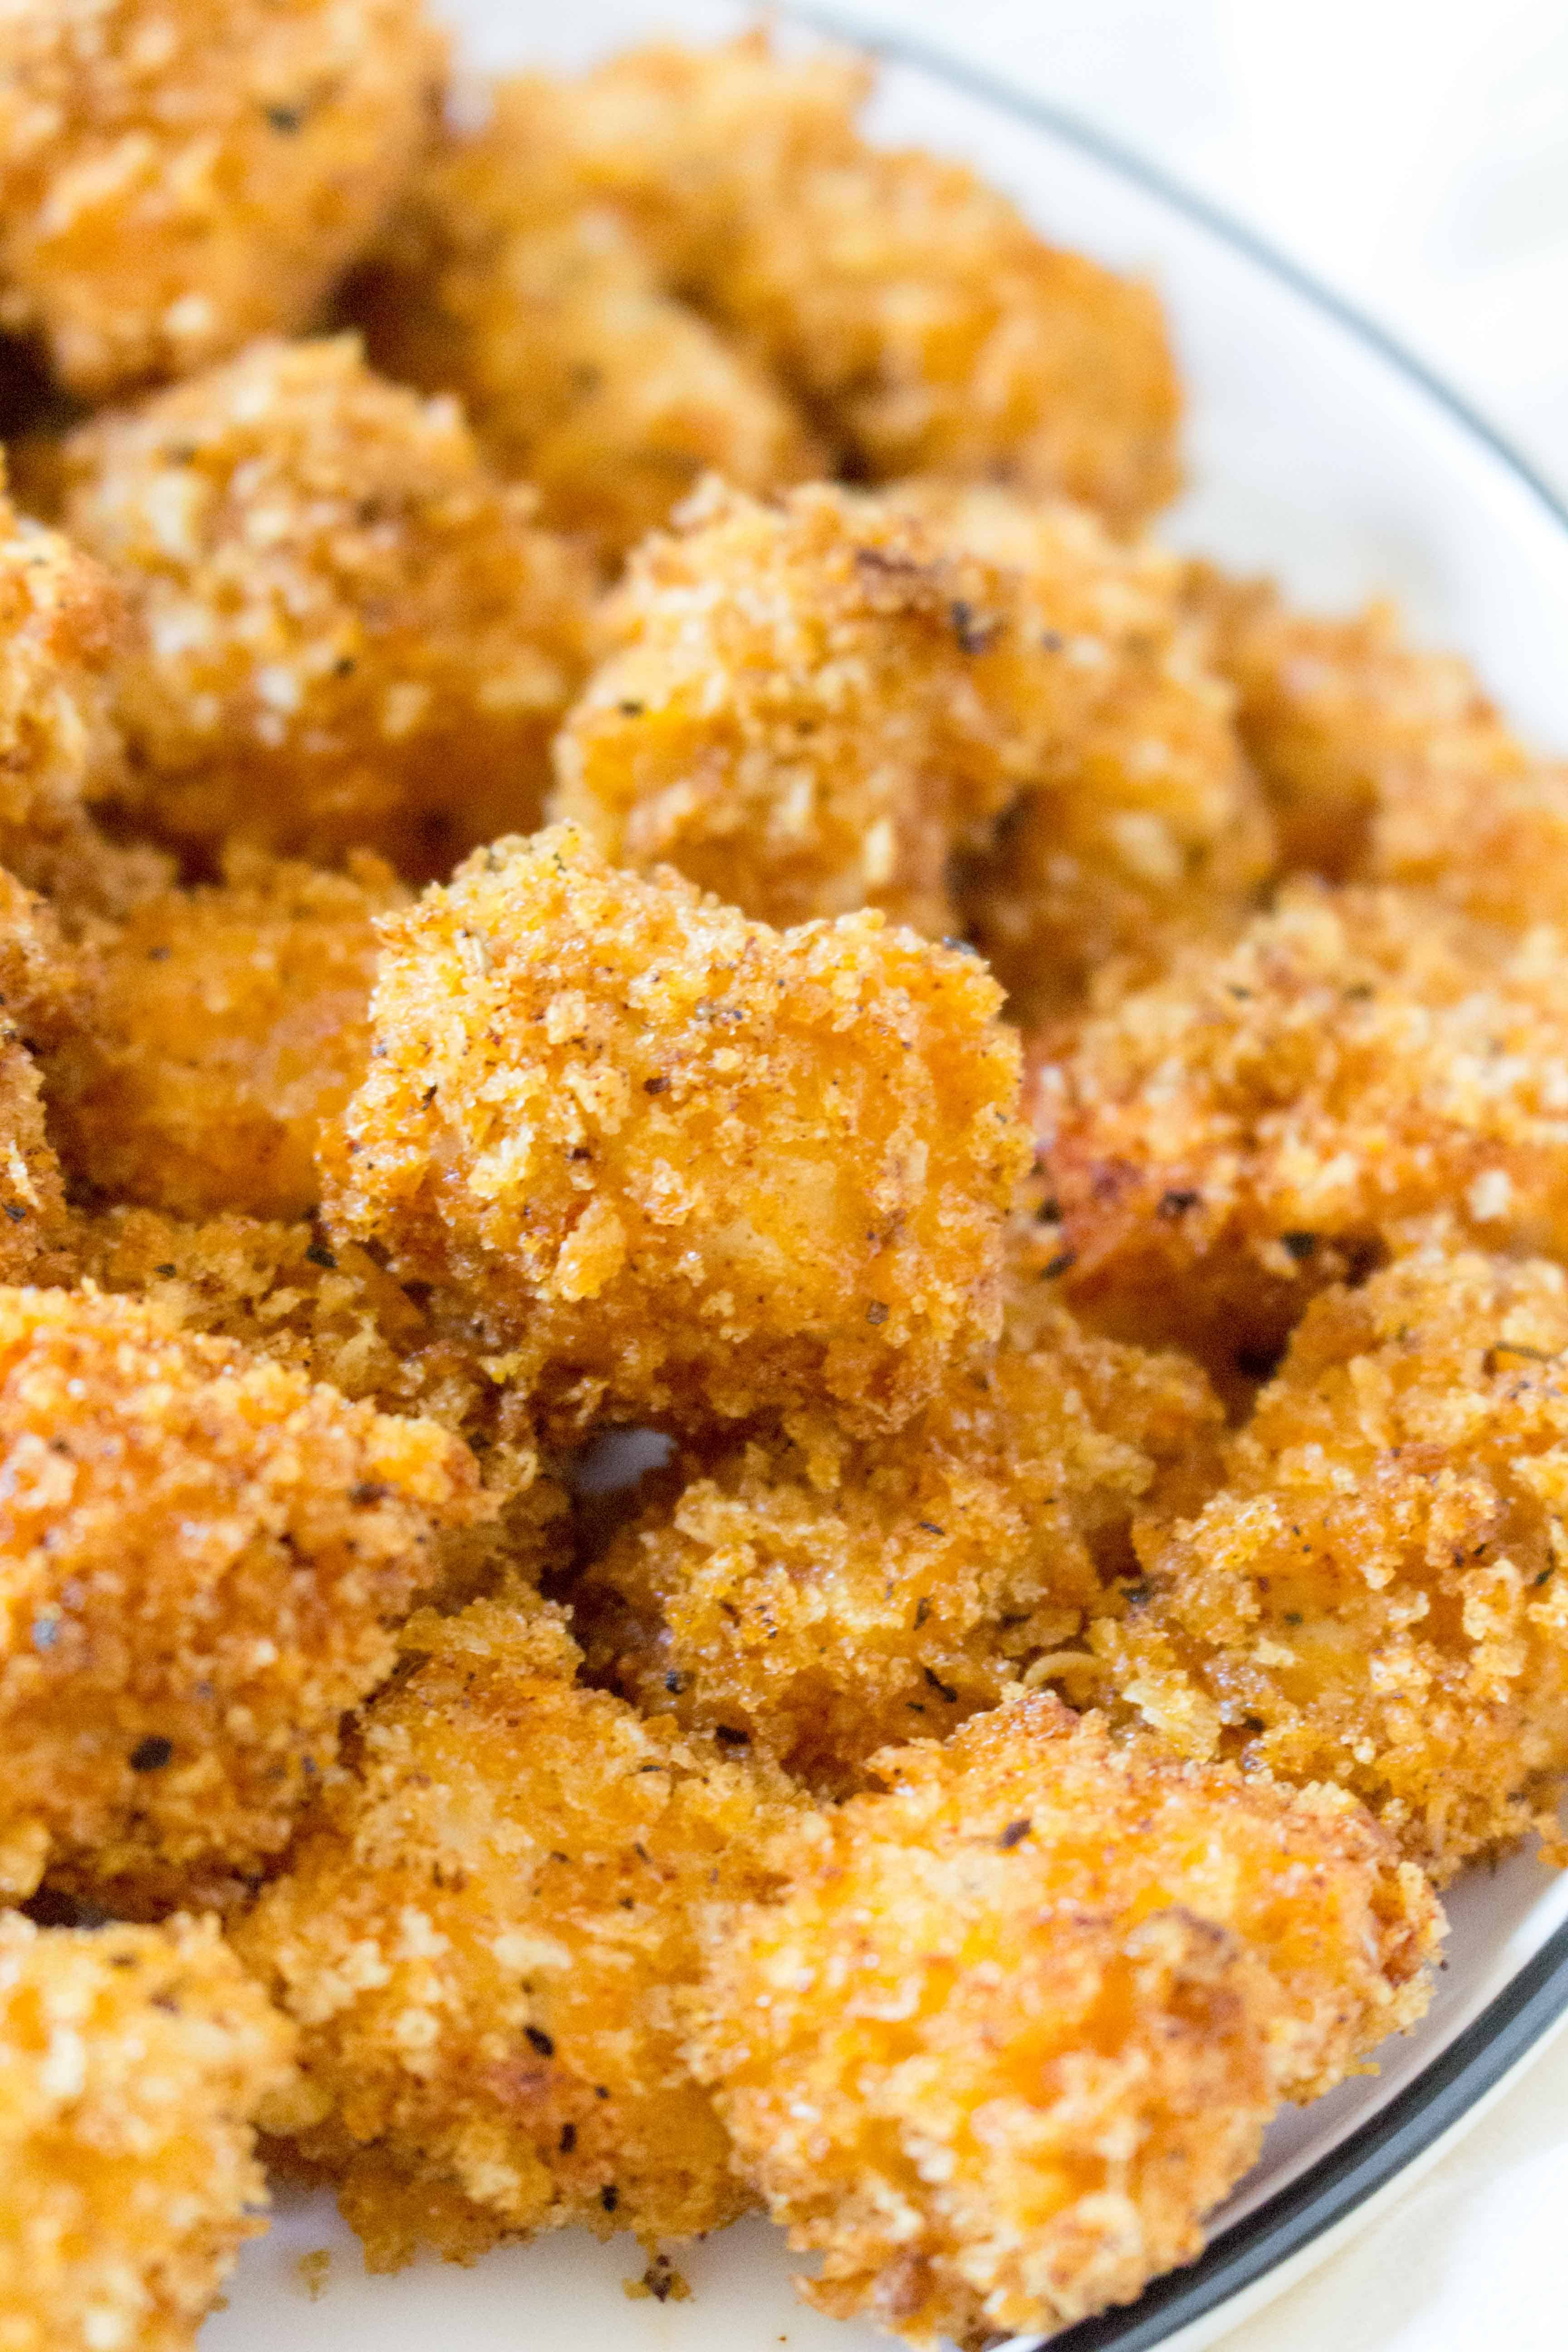 Swap out your frozen store bought chicken nuggets and make these super easy Homemade Baked Chicken Nuggets instead!